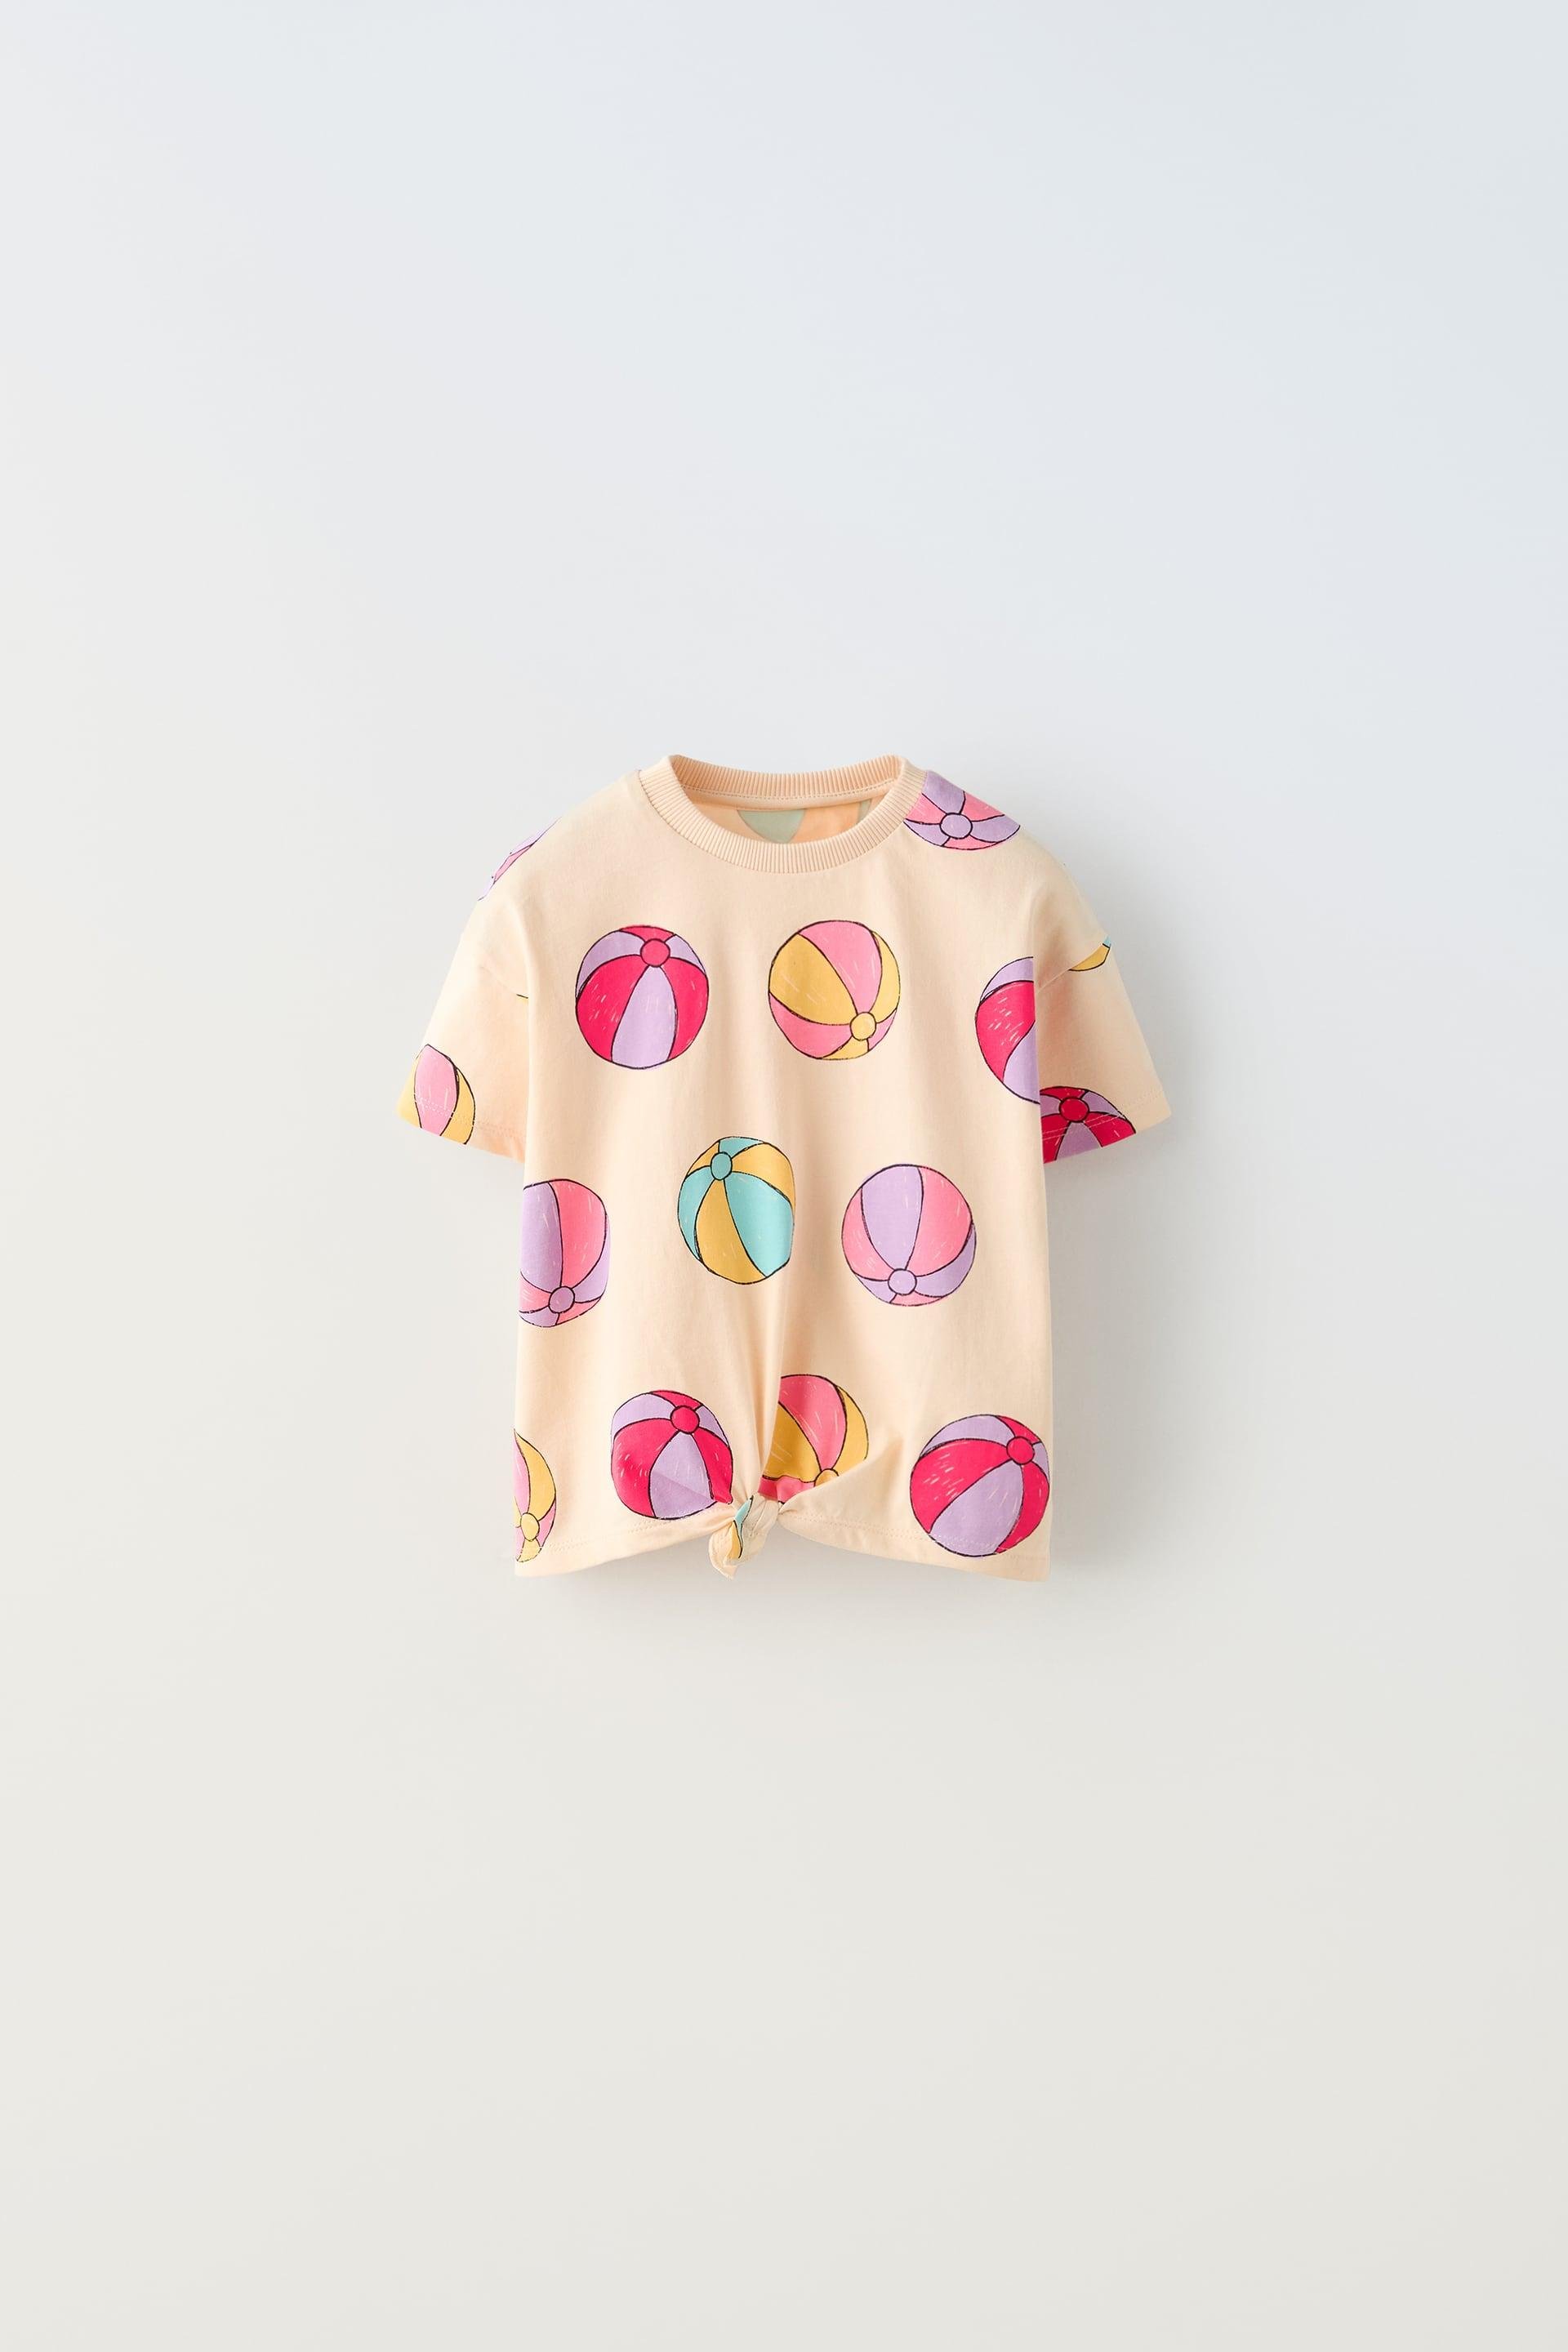 KNOTTED PRINTED T-SHIRT by ZARA